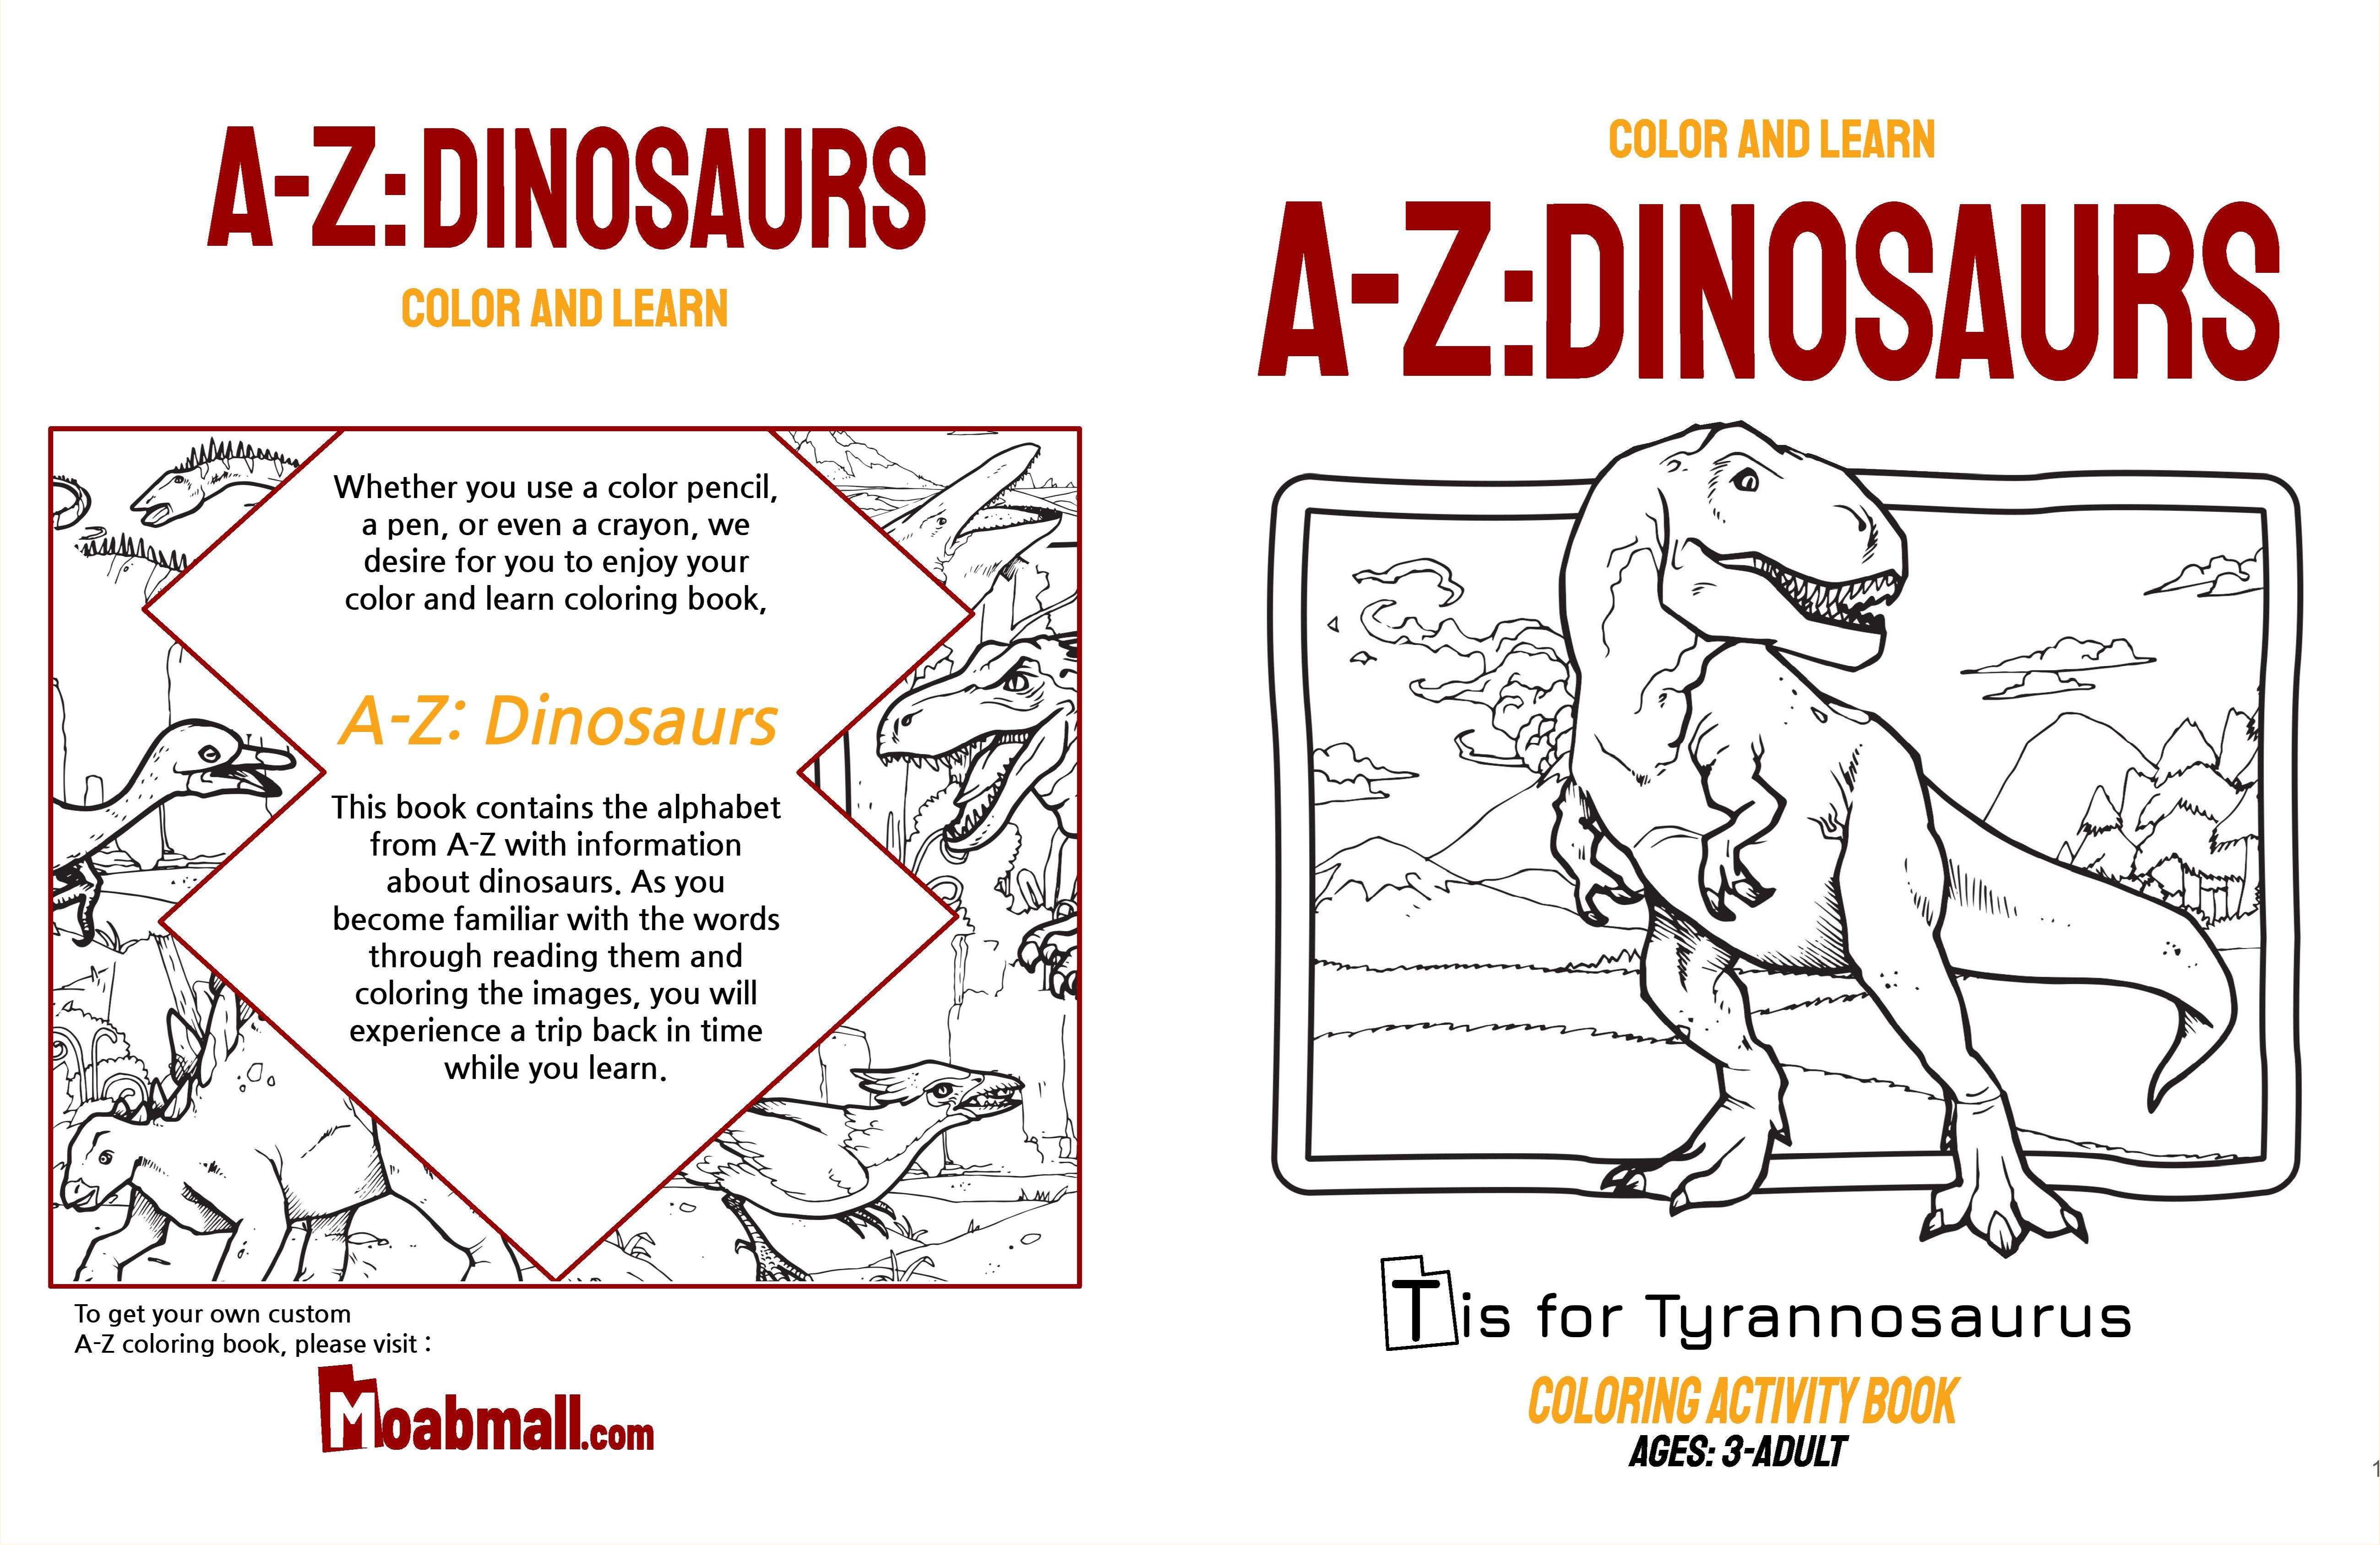 A-Z: Dinosaurs cover image